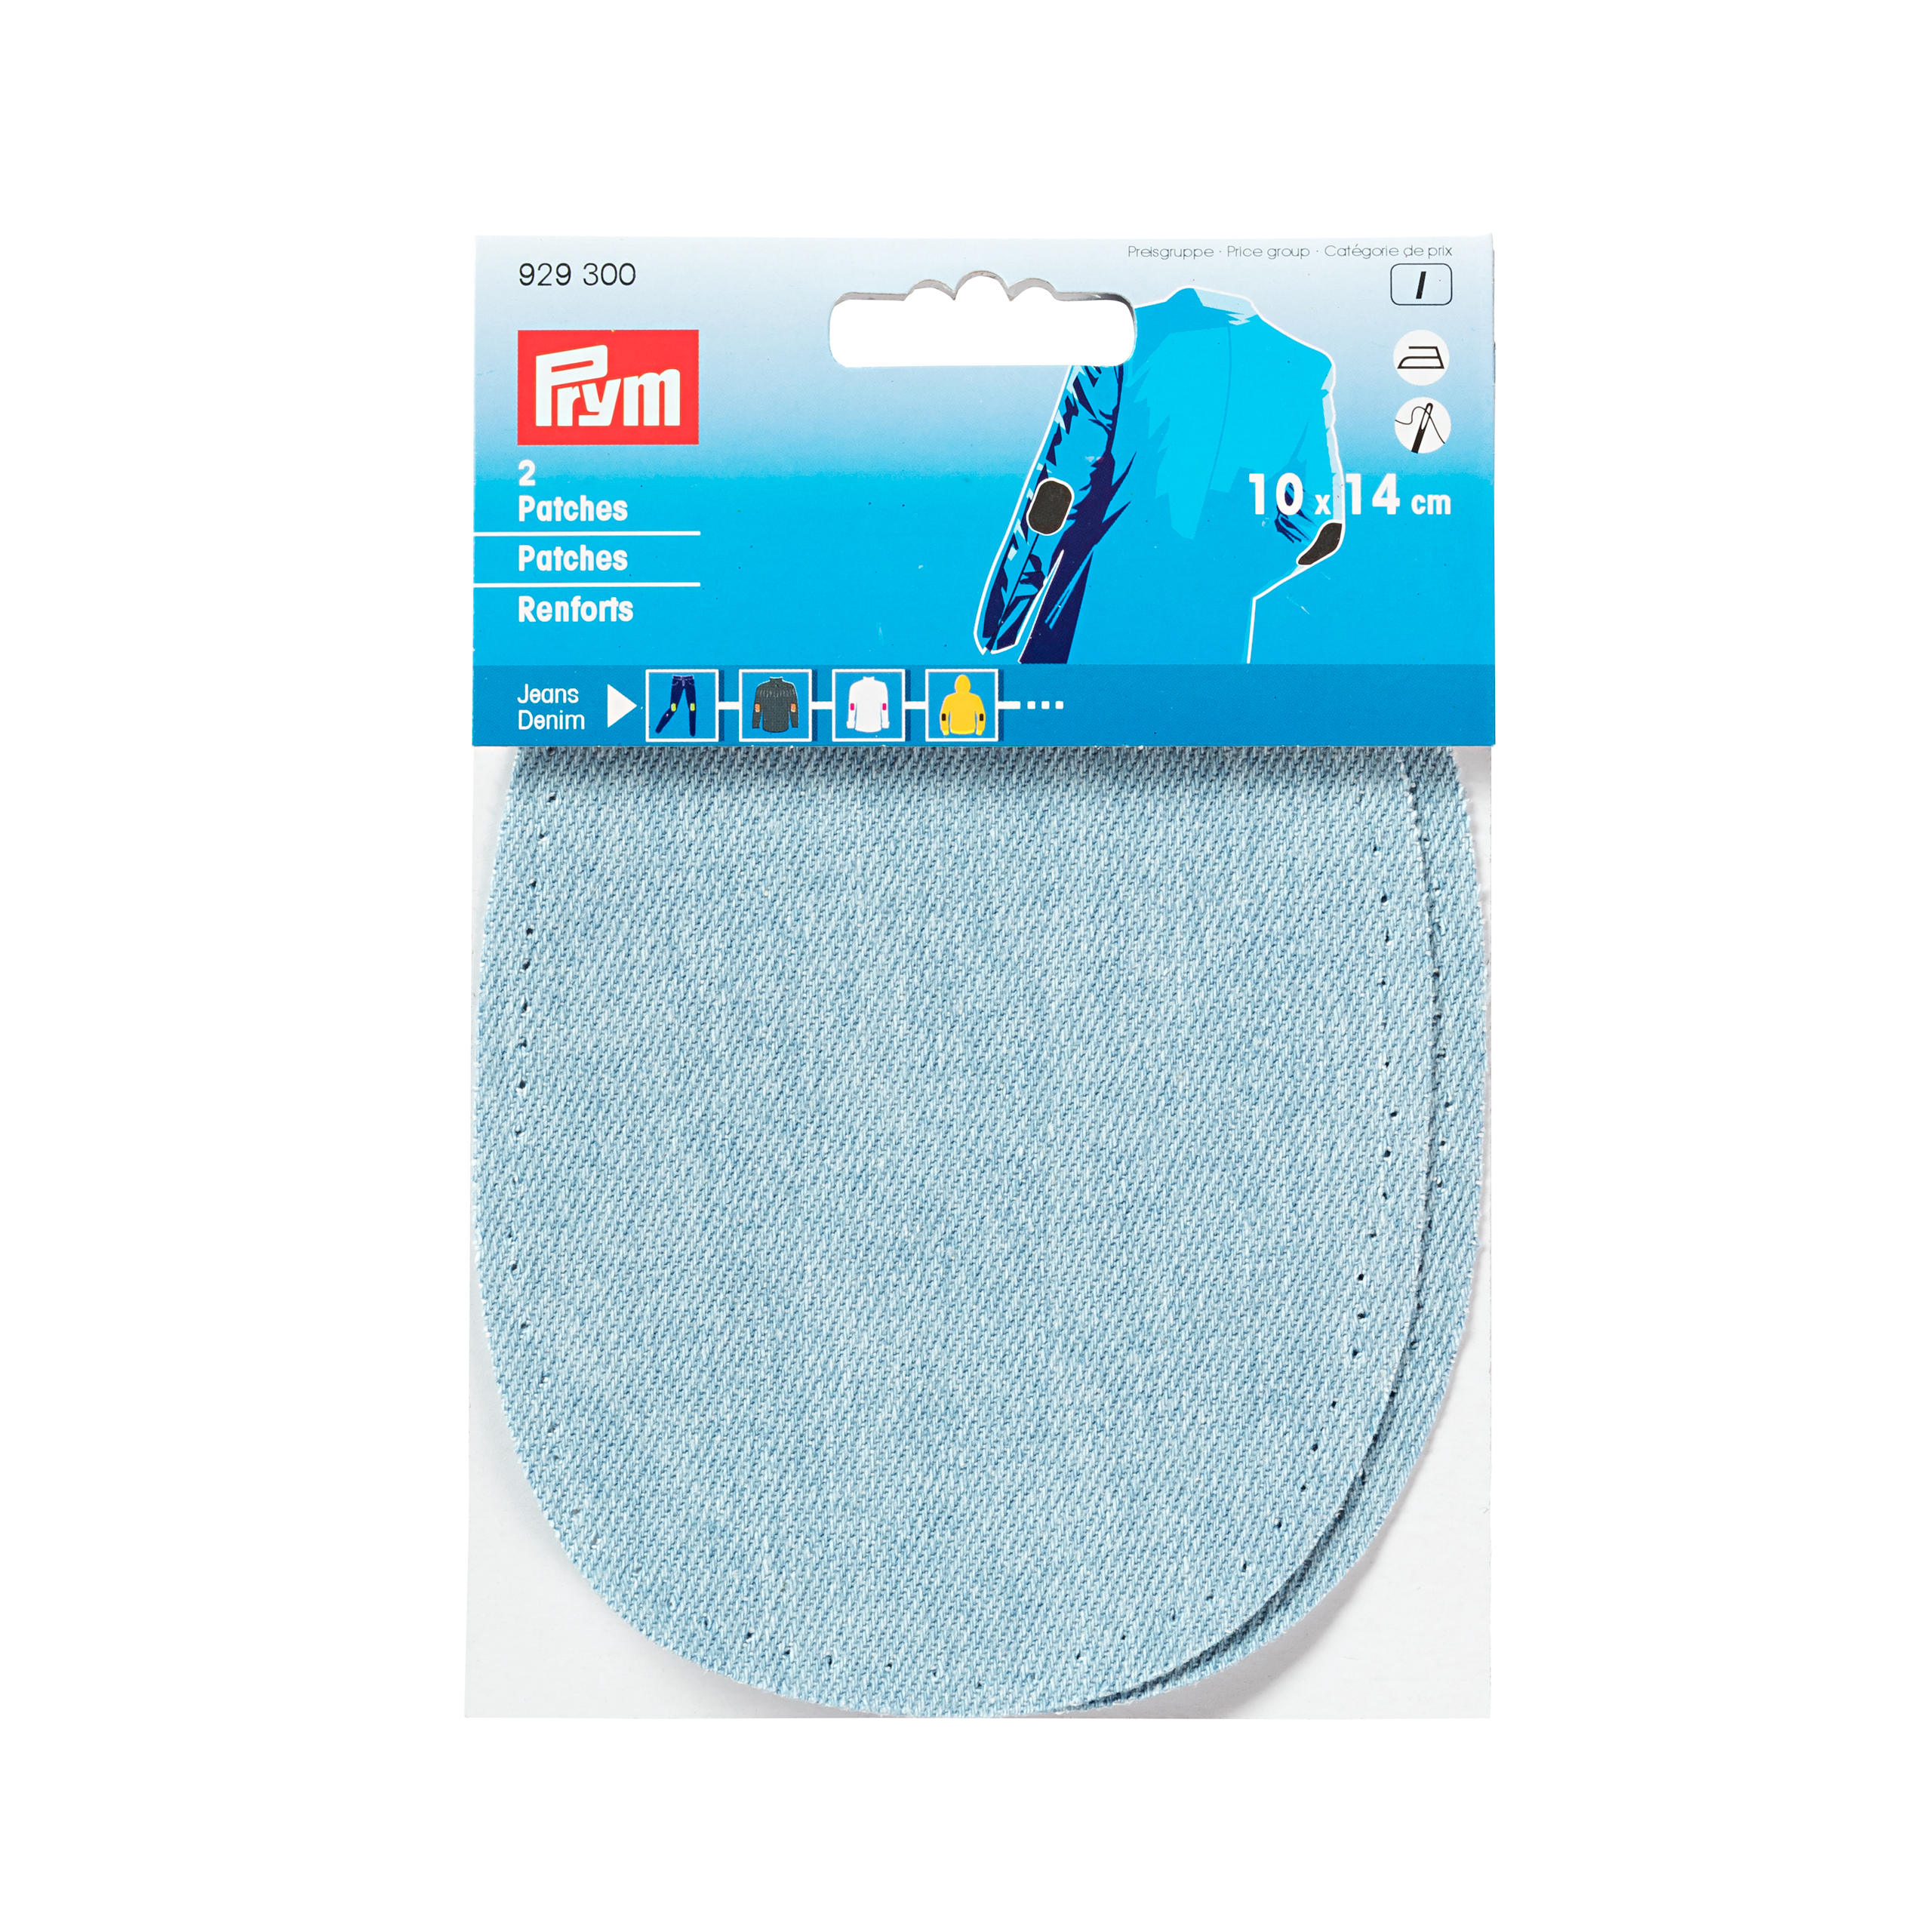 Patches denim for ironing/sewing on 10 x 14 cm light blue, 2 St